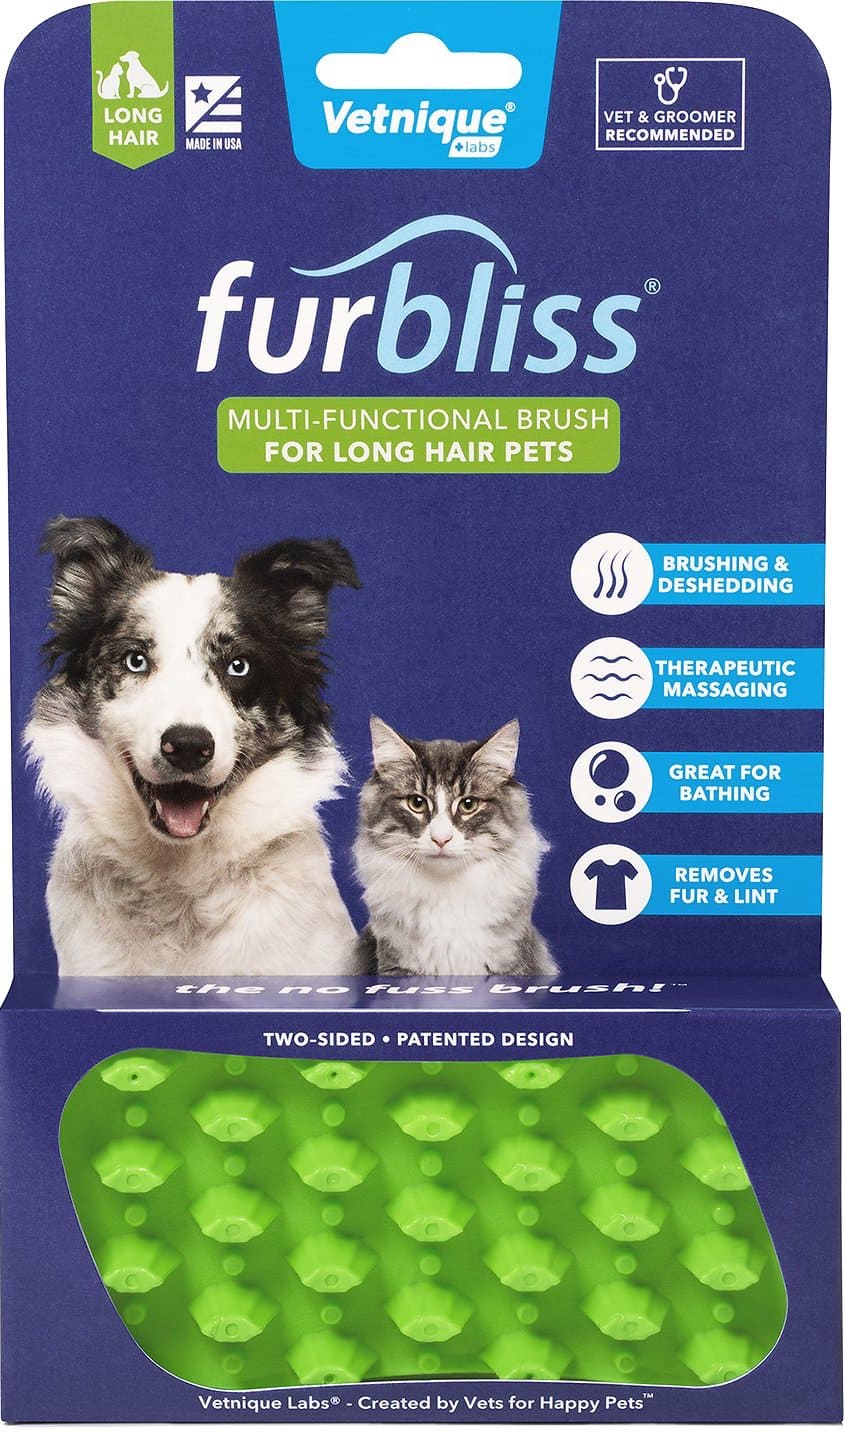 Furbliss Multi-Functional Brush for Pets 1 count with long hair (Green) 1